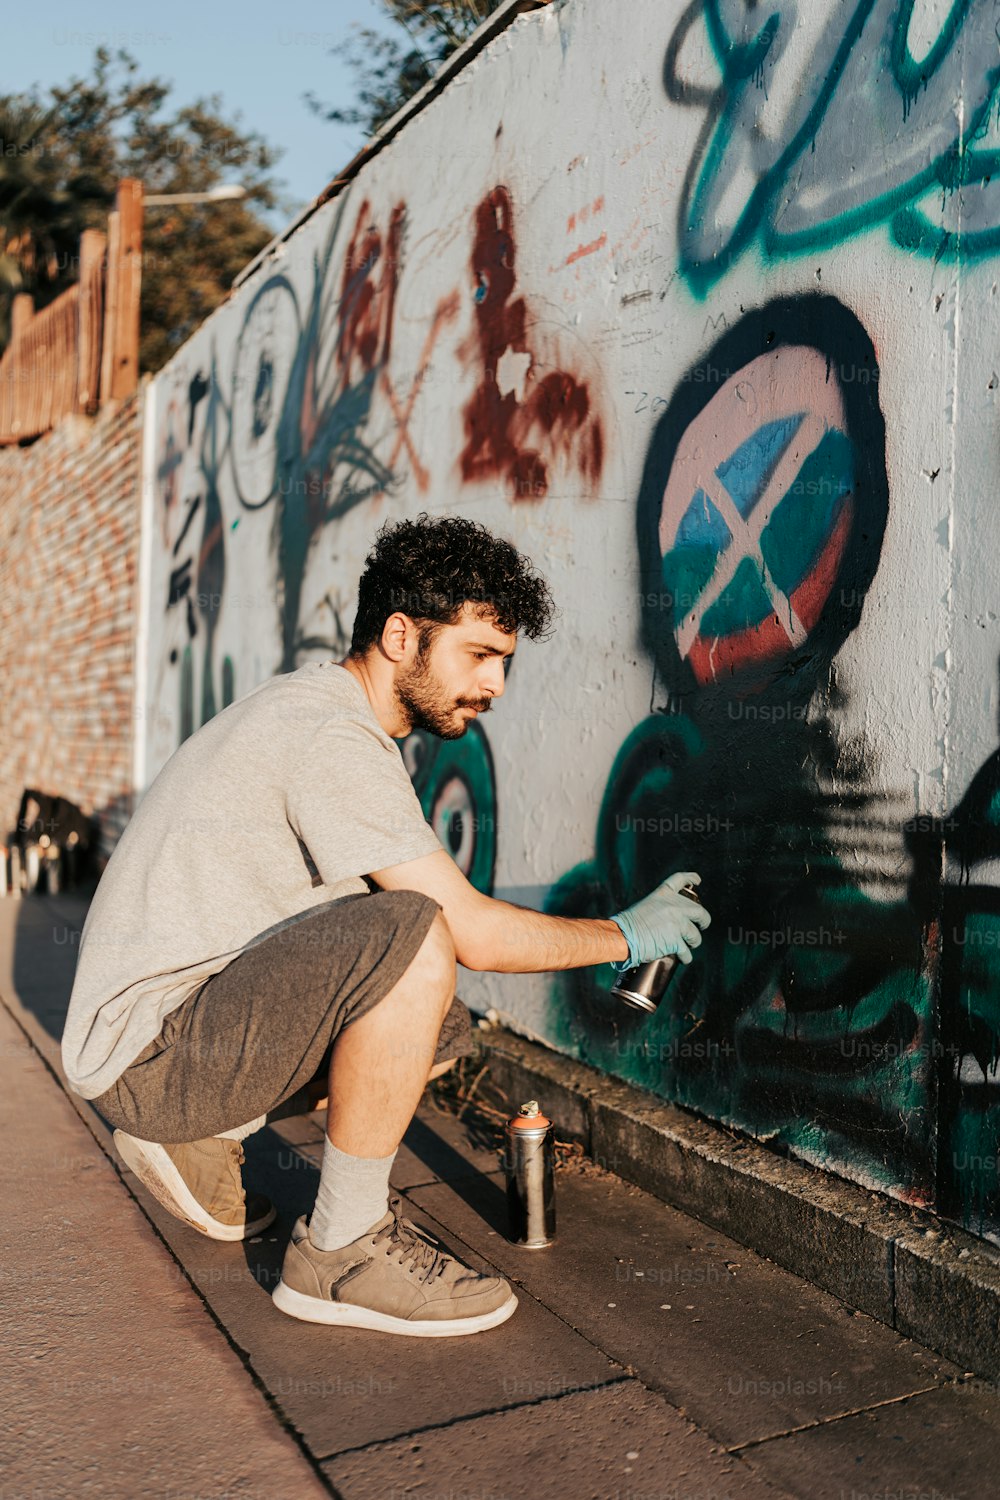 a man kneeling down next to a wall with graffiti on it